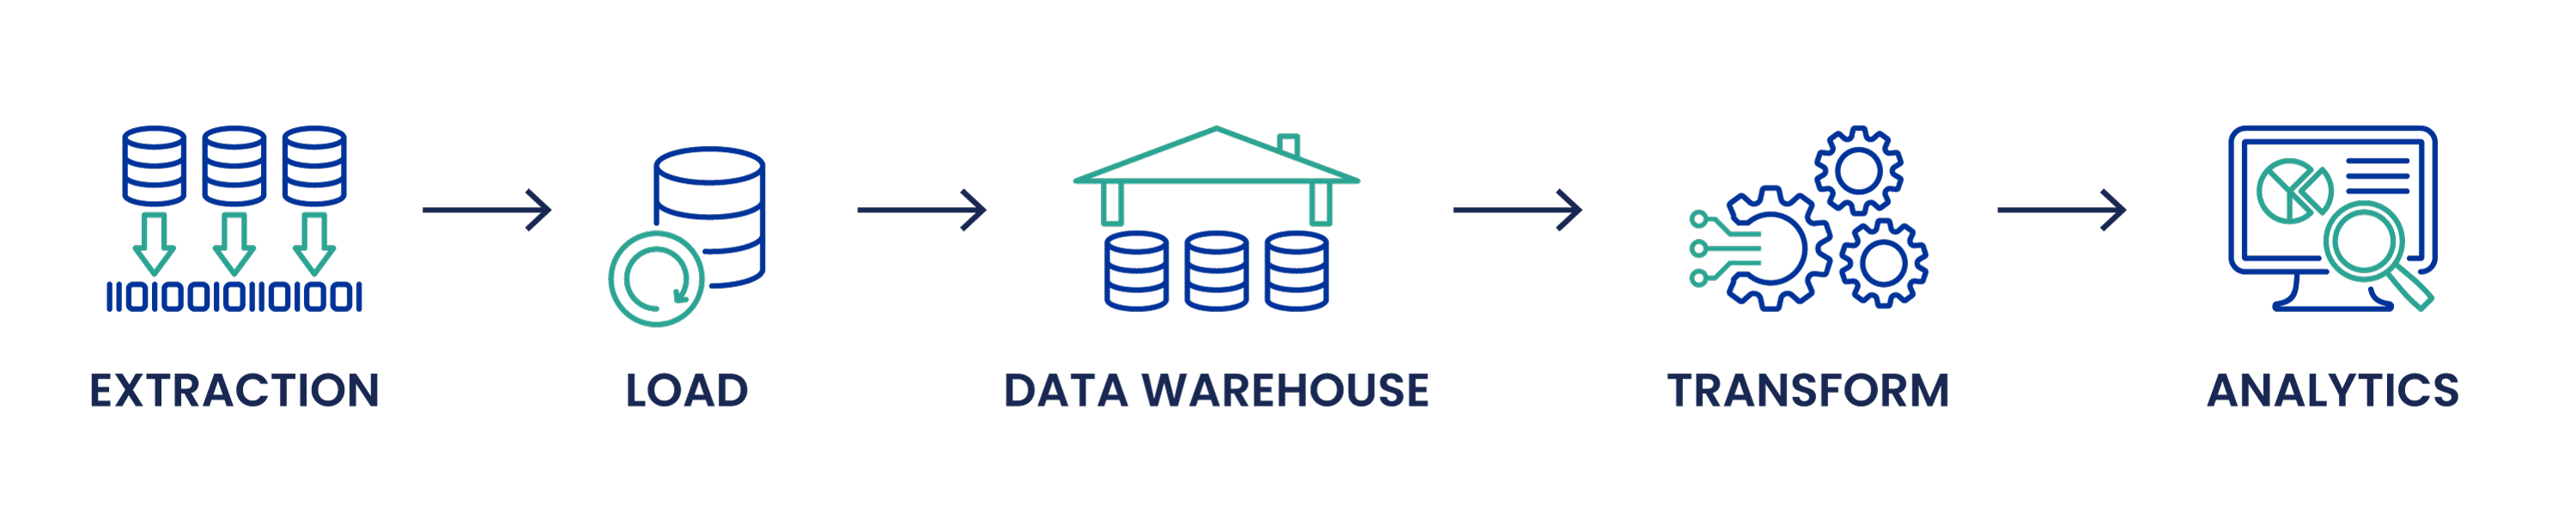 ELT (extract, load, transform) uses cloud data warehouses to load all types of data without having to make complex transformations first